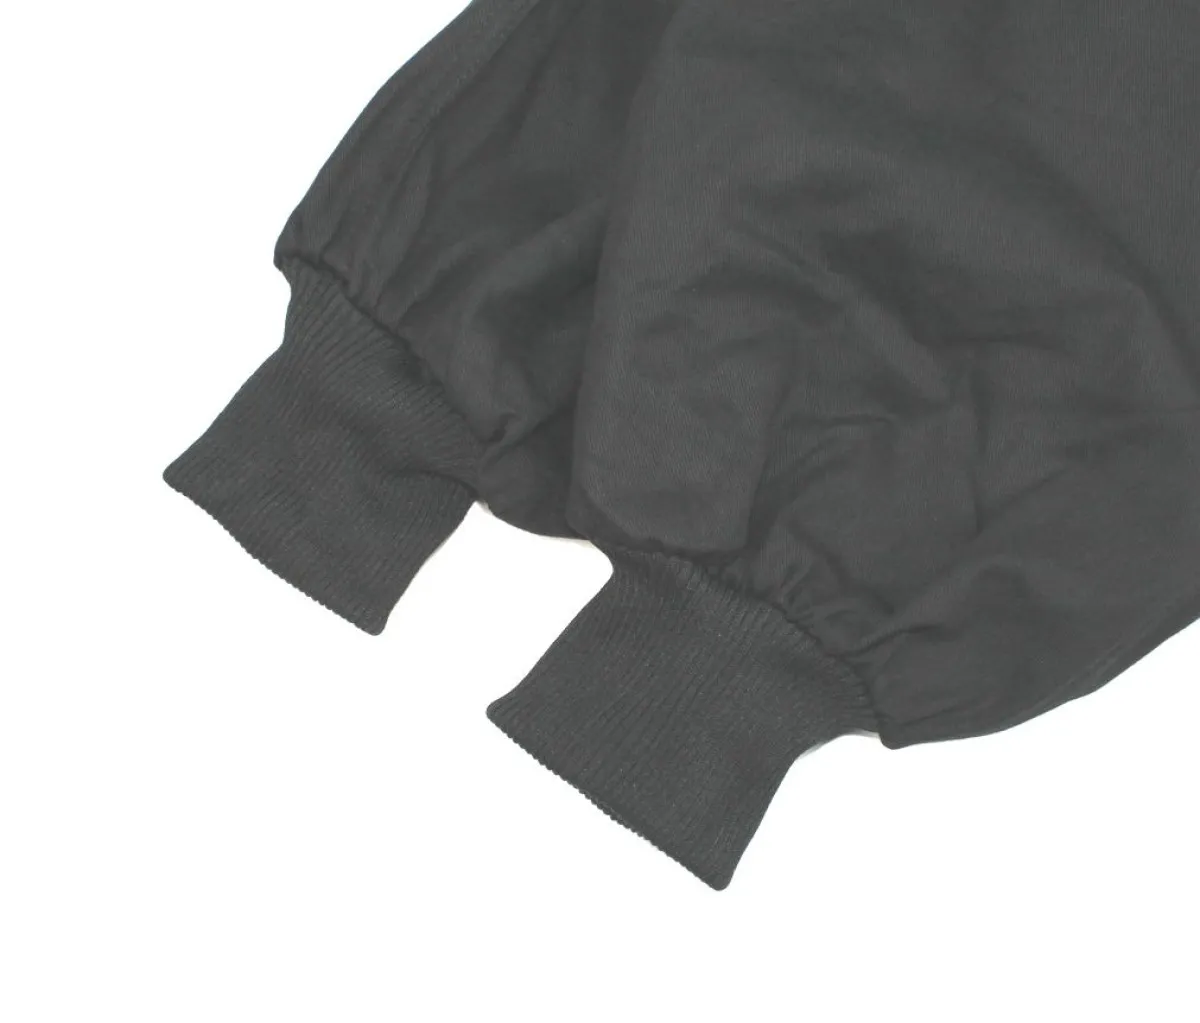 Black cotton trousers with cuffs